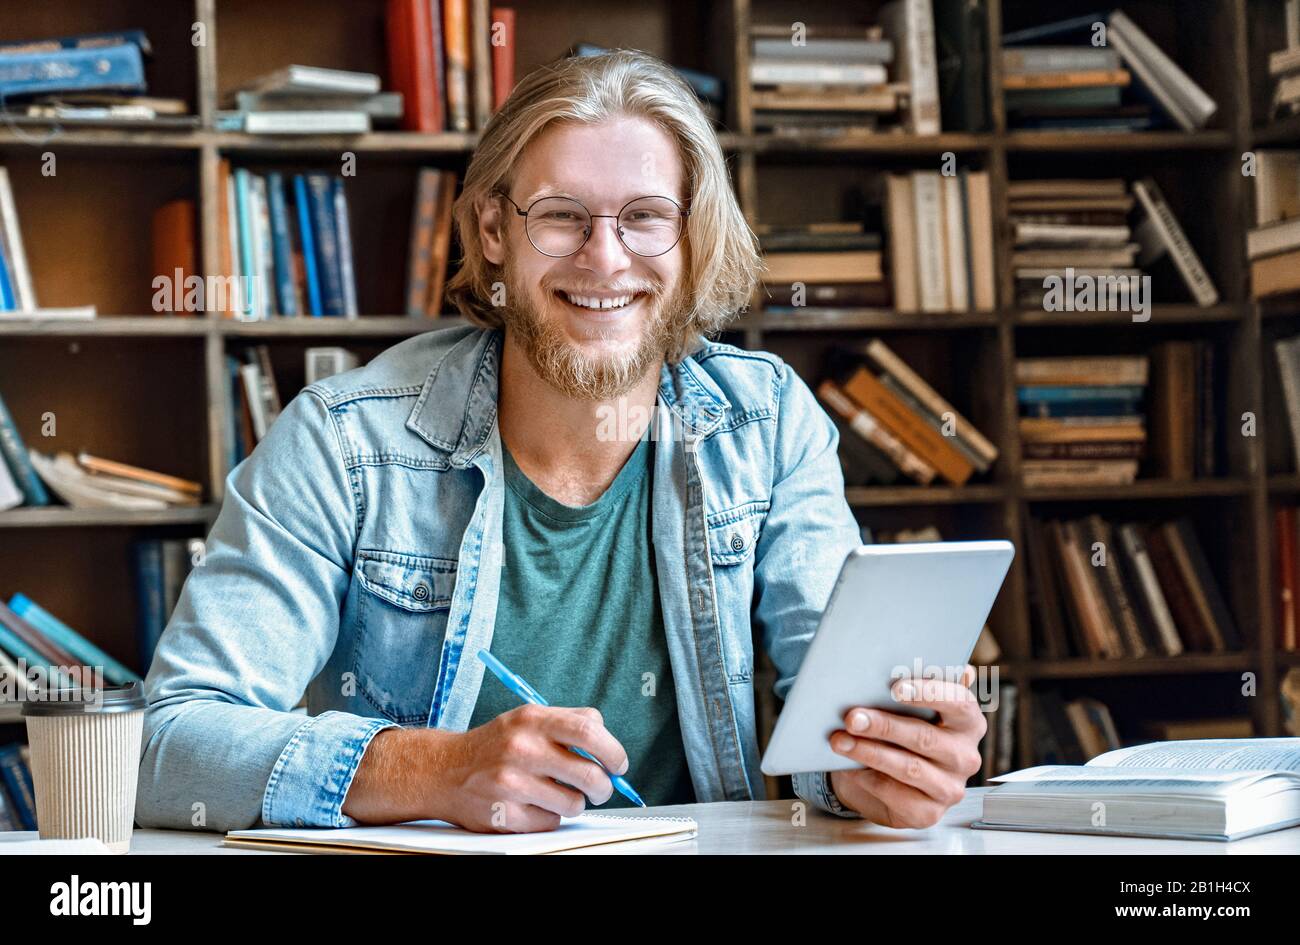 Student hold modern tablet make notes in notebook empty smile at camera Stock Photo